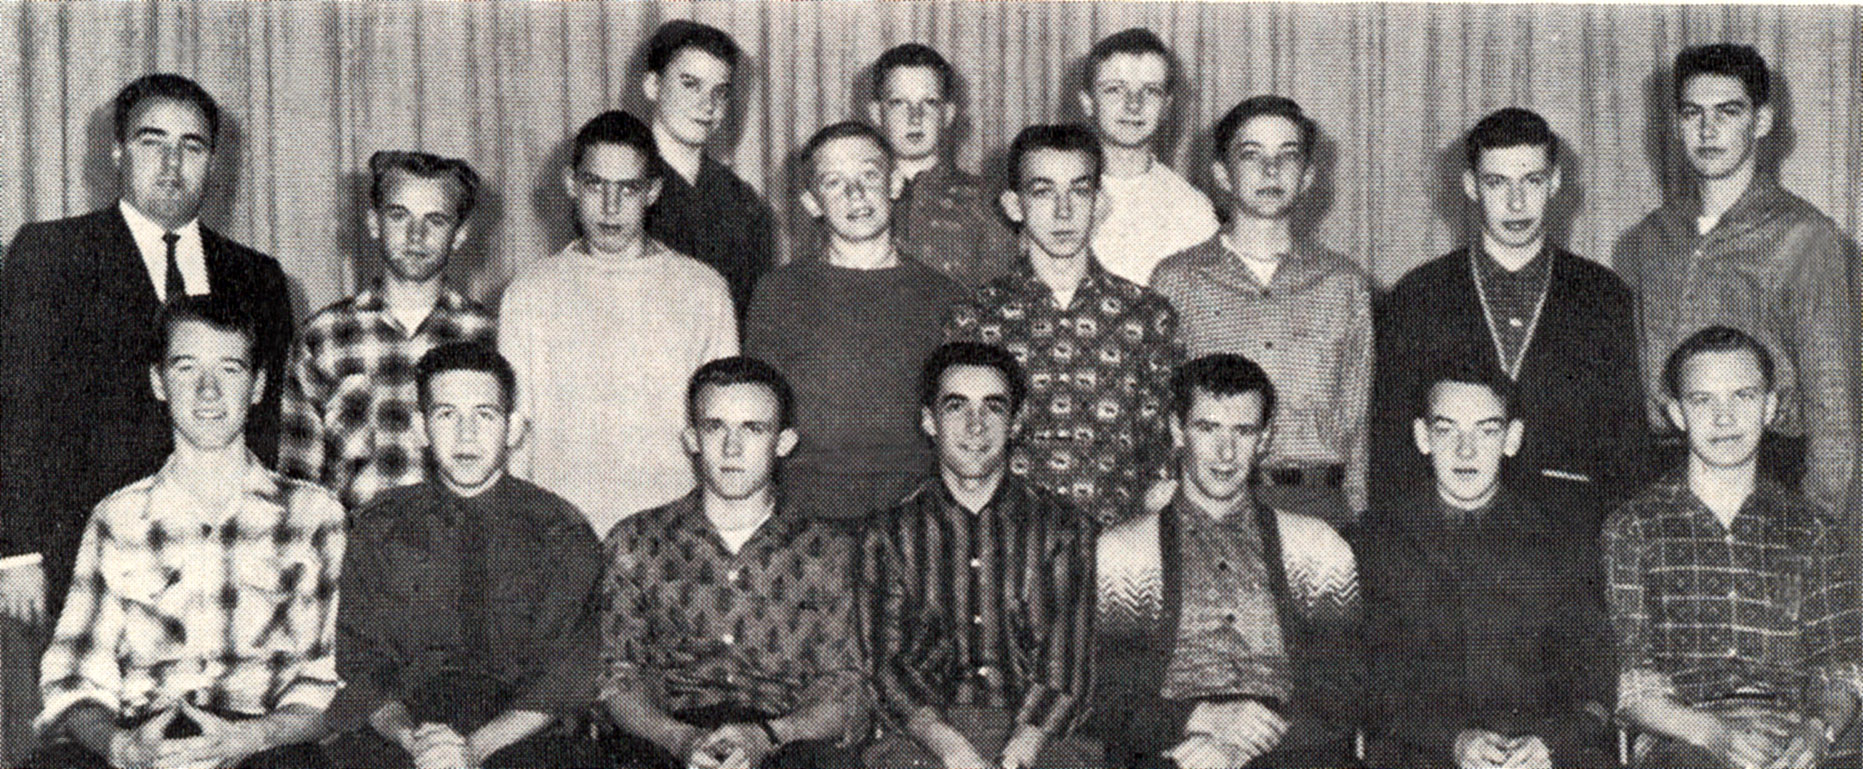 Back Row: Barry Leask, Ron Cleverdon, Barry Morrison Middle Row: Mr. Ray Newton, Raye McGuckin, Robbie Rattray, Sandy Williamson,Keith James, Grant Lickiss, Alvin Brooks, Carl Stevenson, Front Row: Murray Prentice, John Sargeant, Ron James, Bruce Shilling